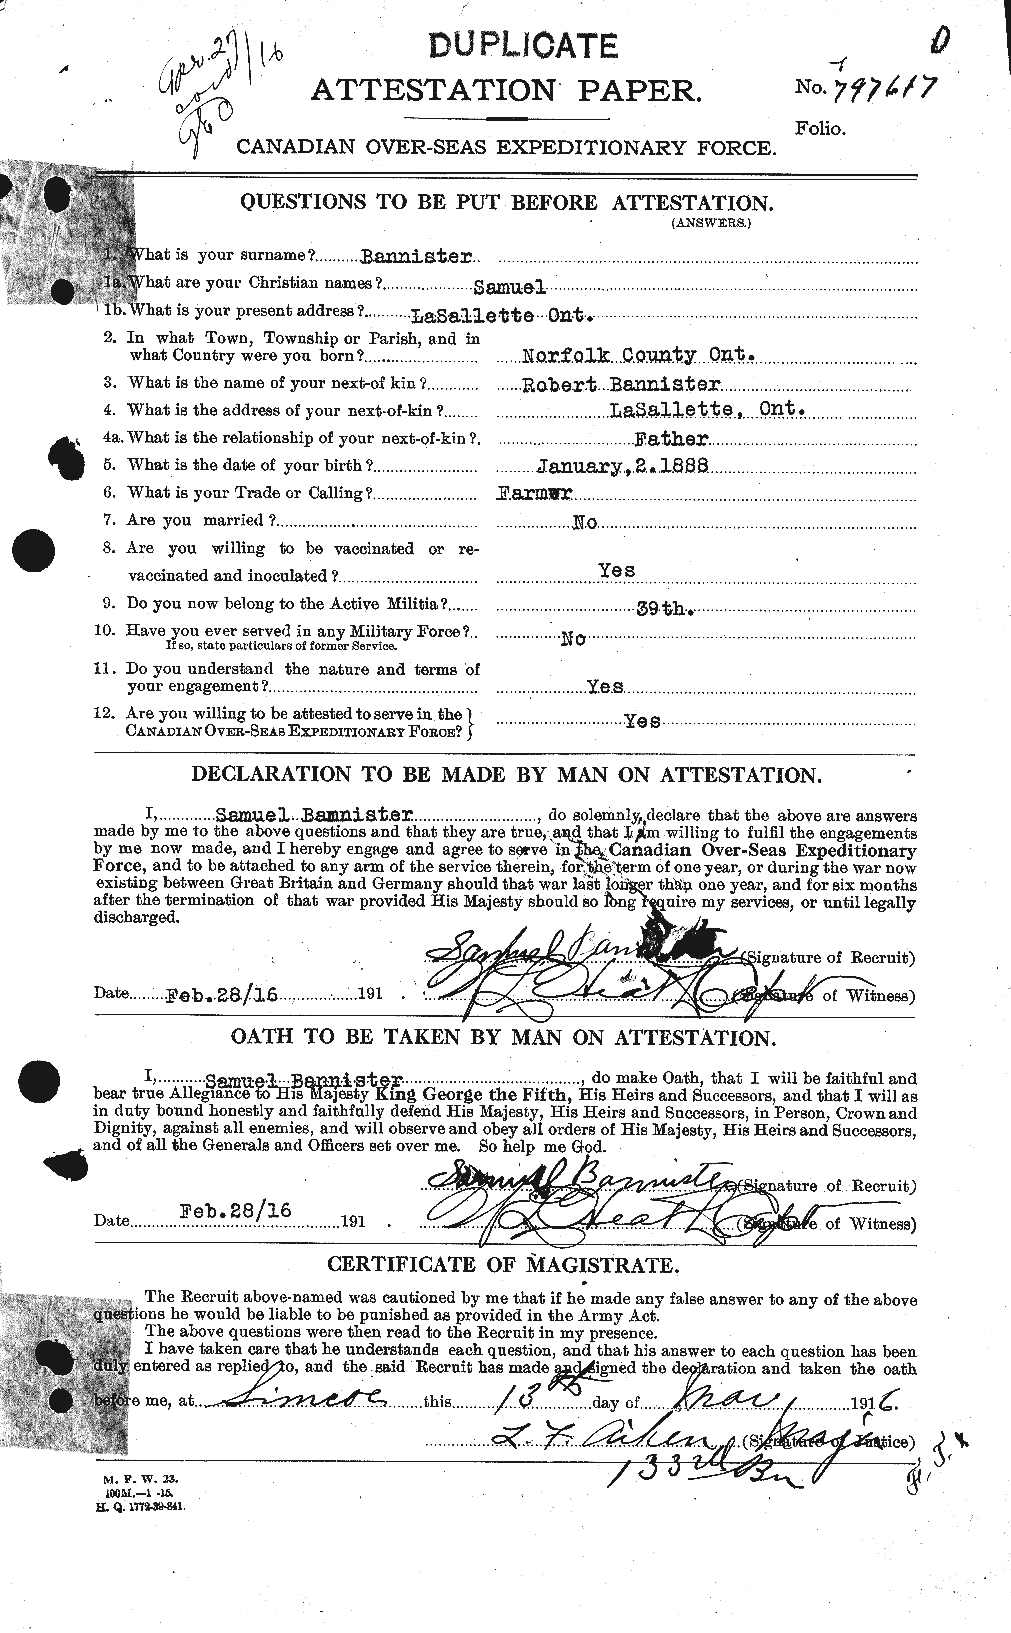 Personnel Records of the First World War - CEF 224765a